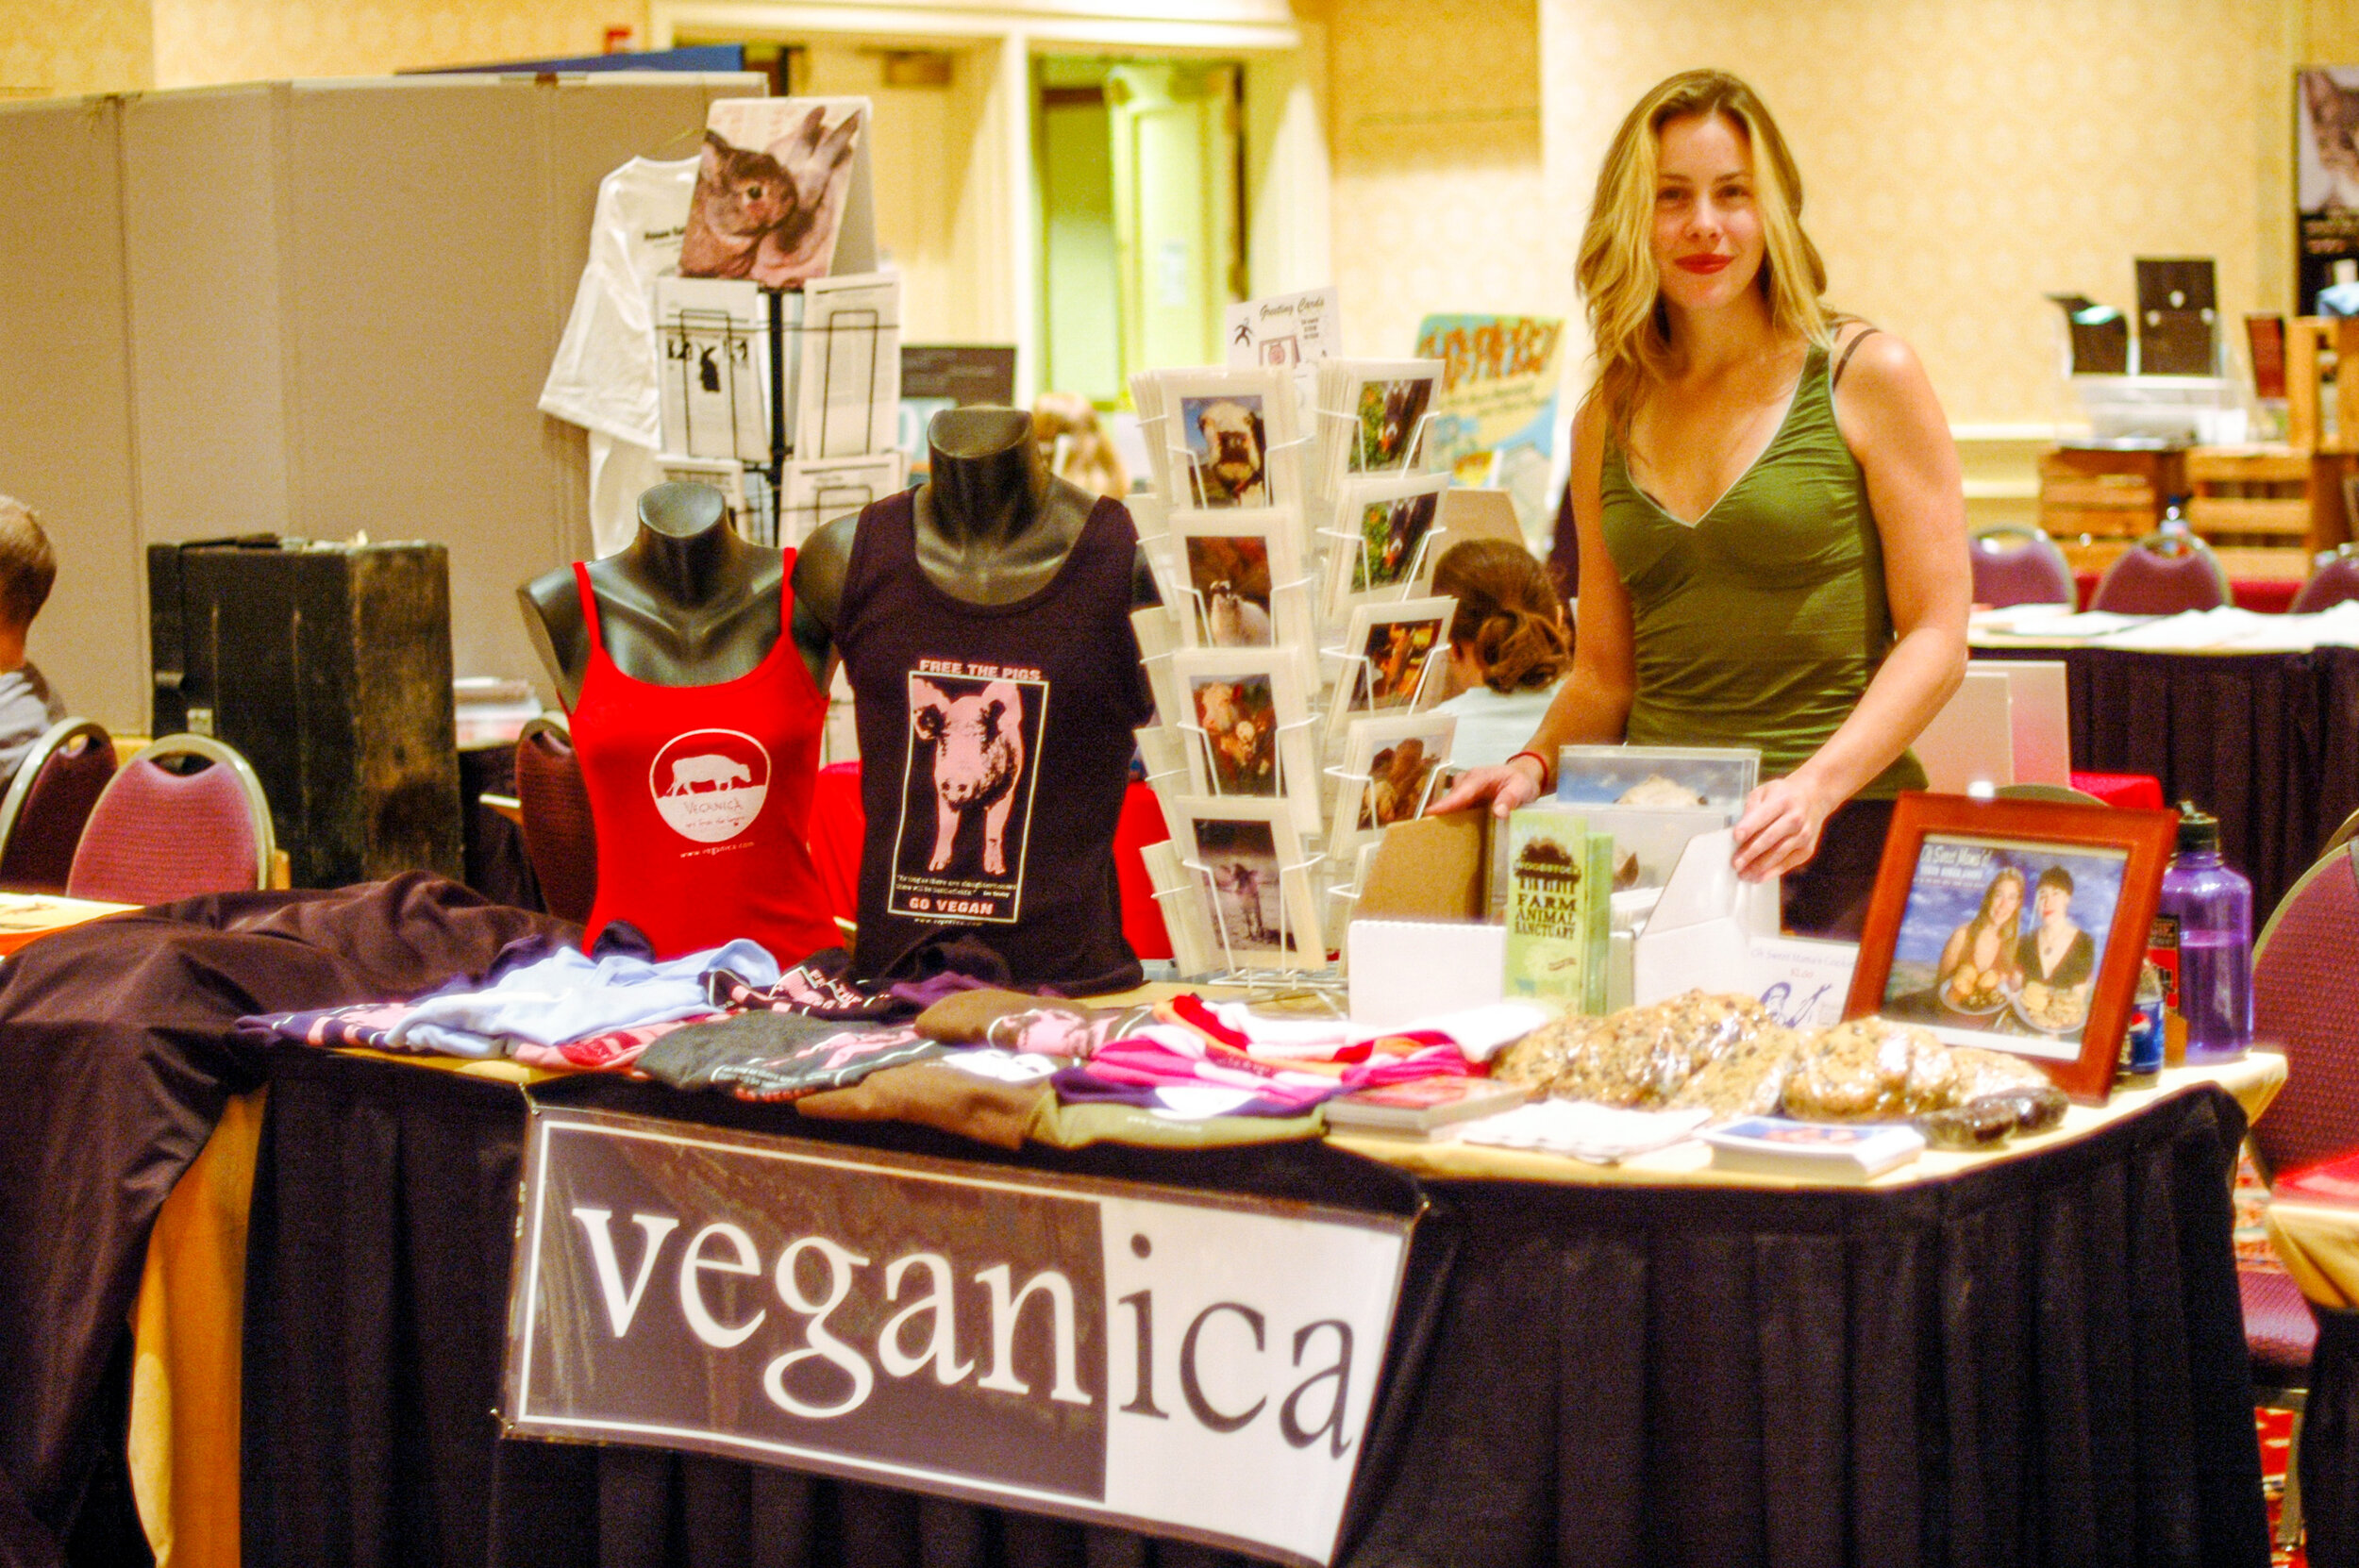 Megan Shackelford/Veganica table at Taking Action for Animals Conference